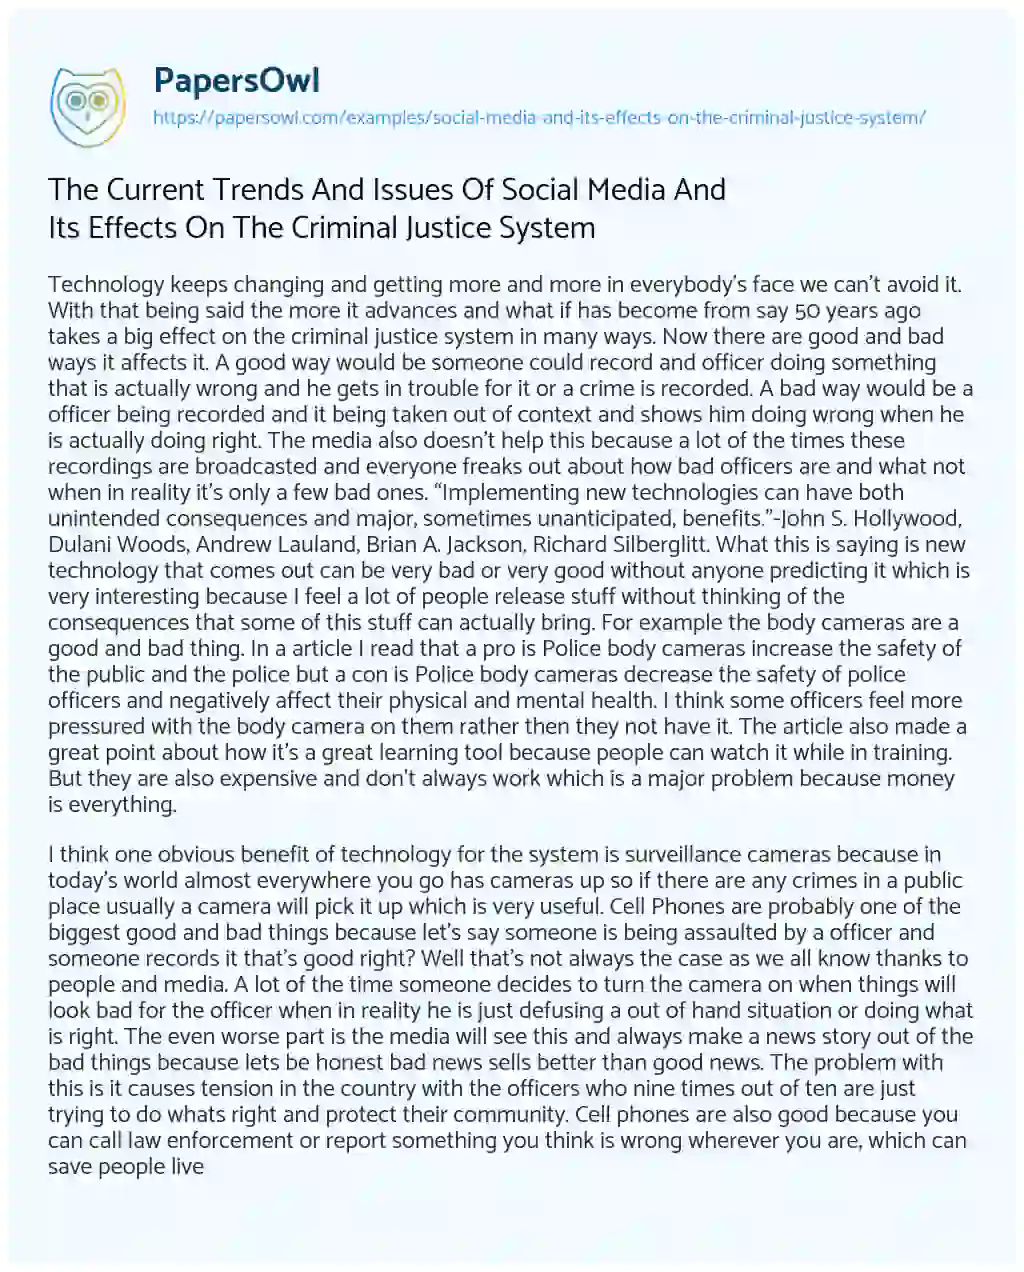 The Current Trends and Issues of Social Media and its Effects on the Criminal Justice System essay